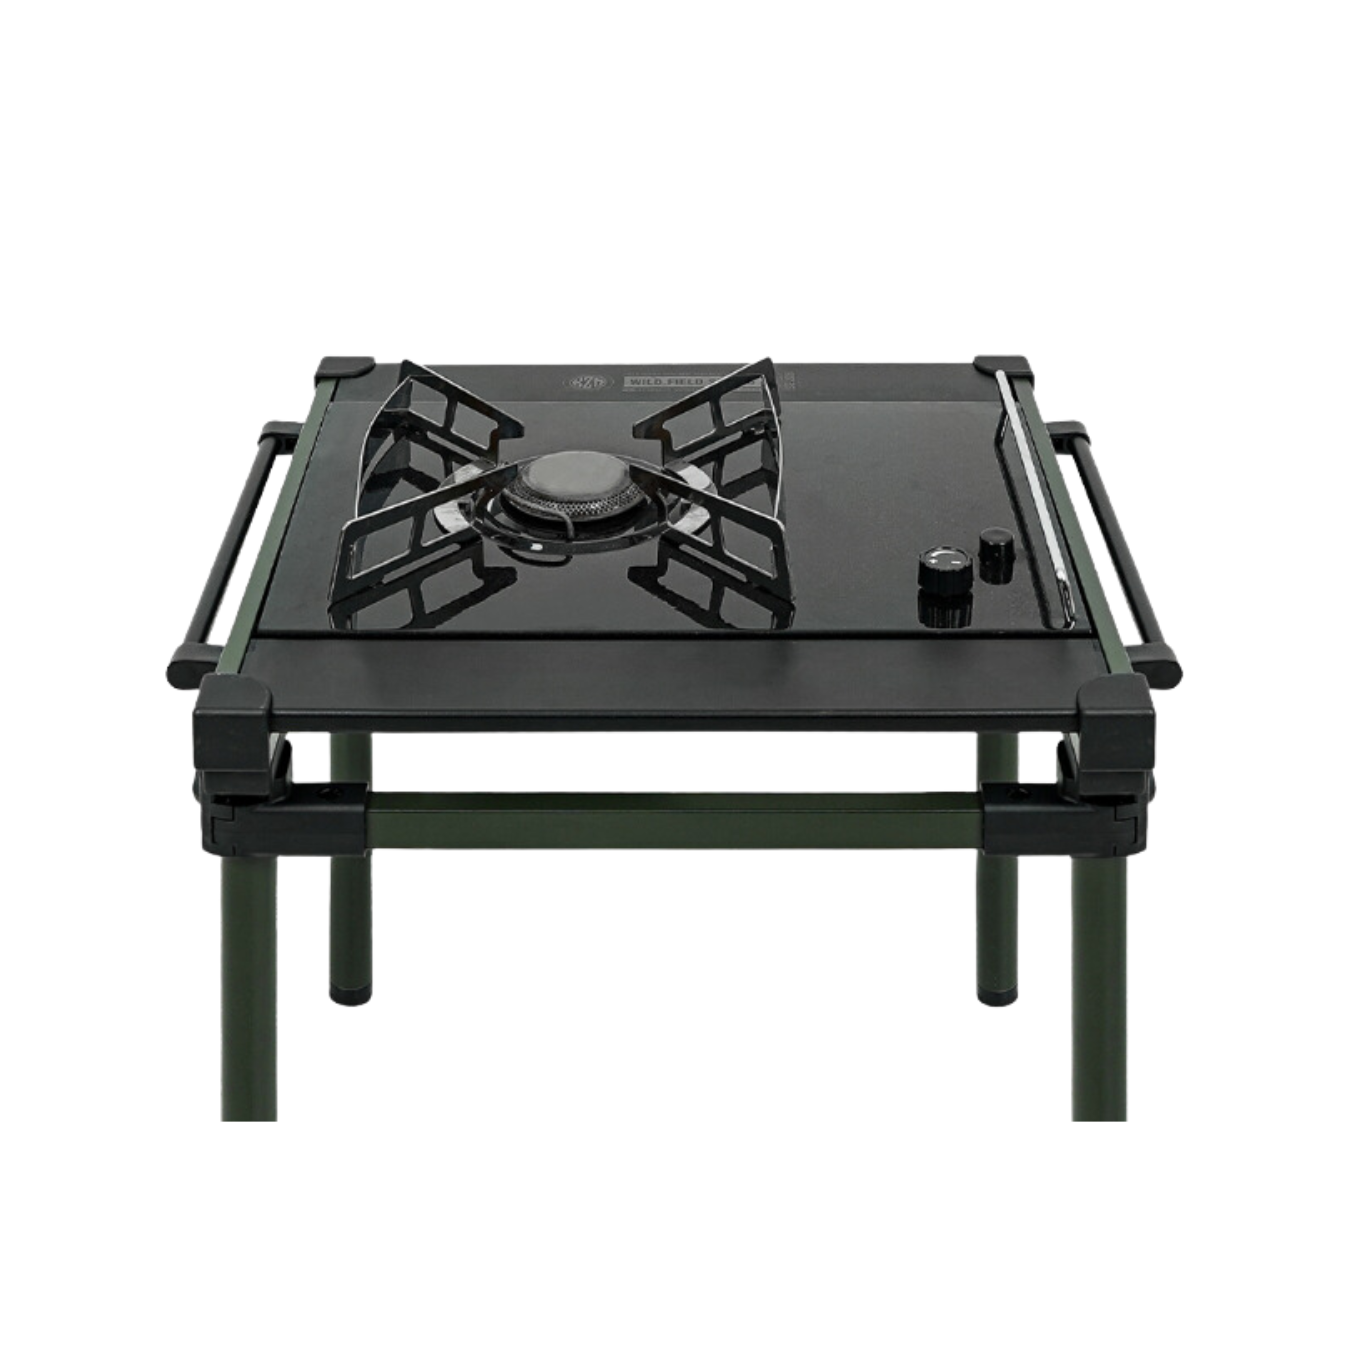 KZM Field Top Stove Table